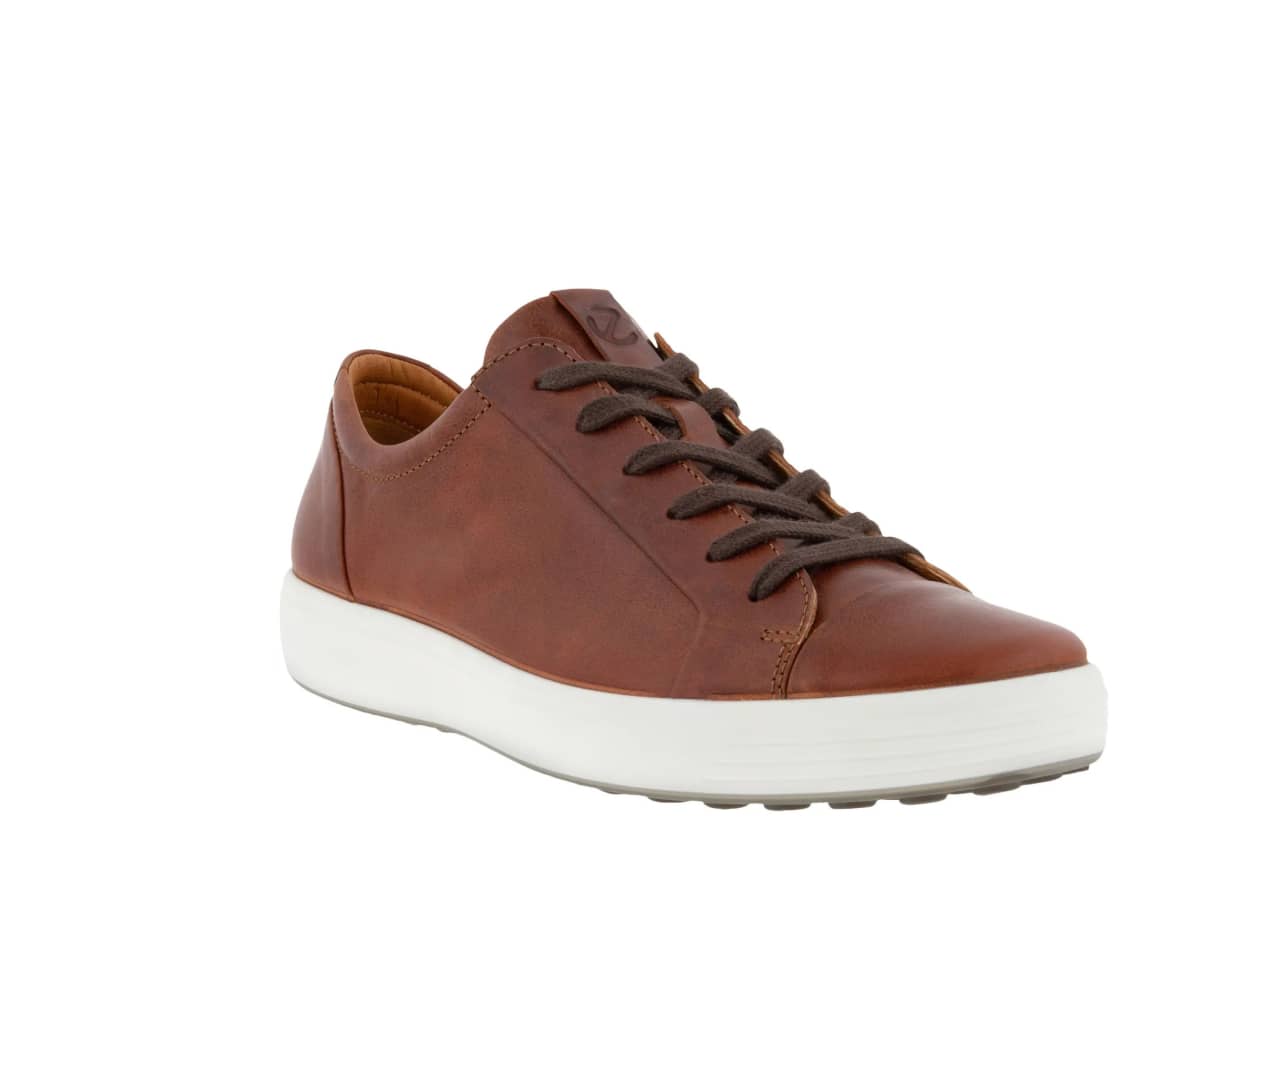 Best Men's Office Sneakers - Causal Stylish Shoes, Rank & Style